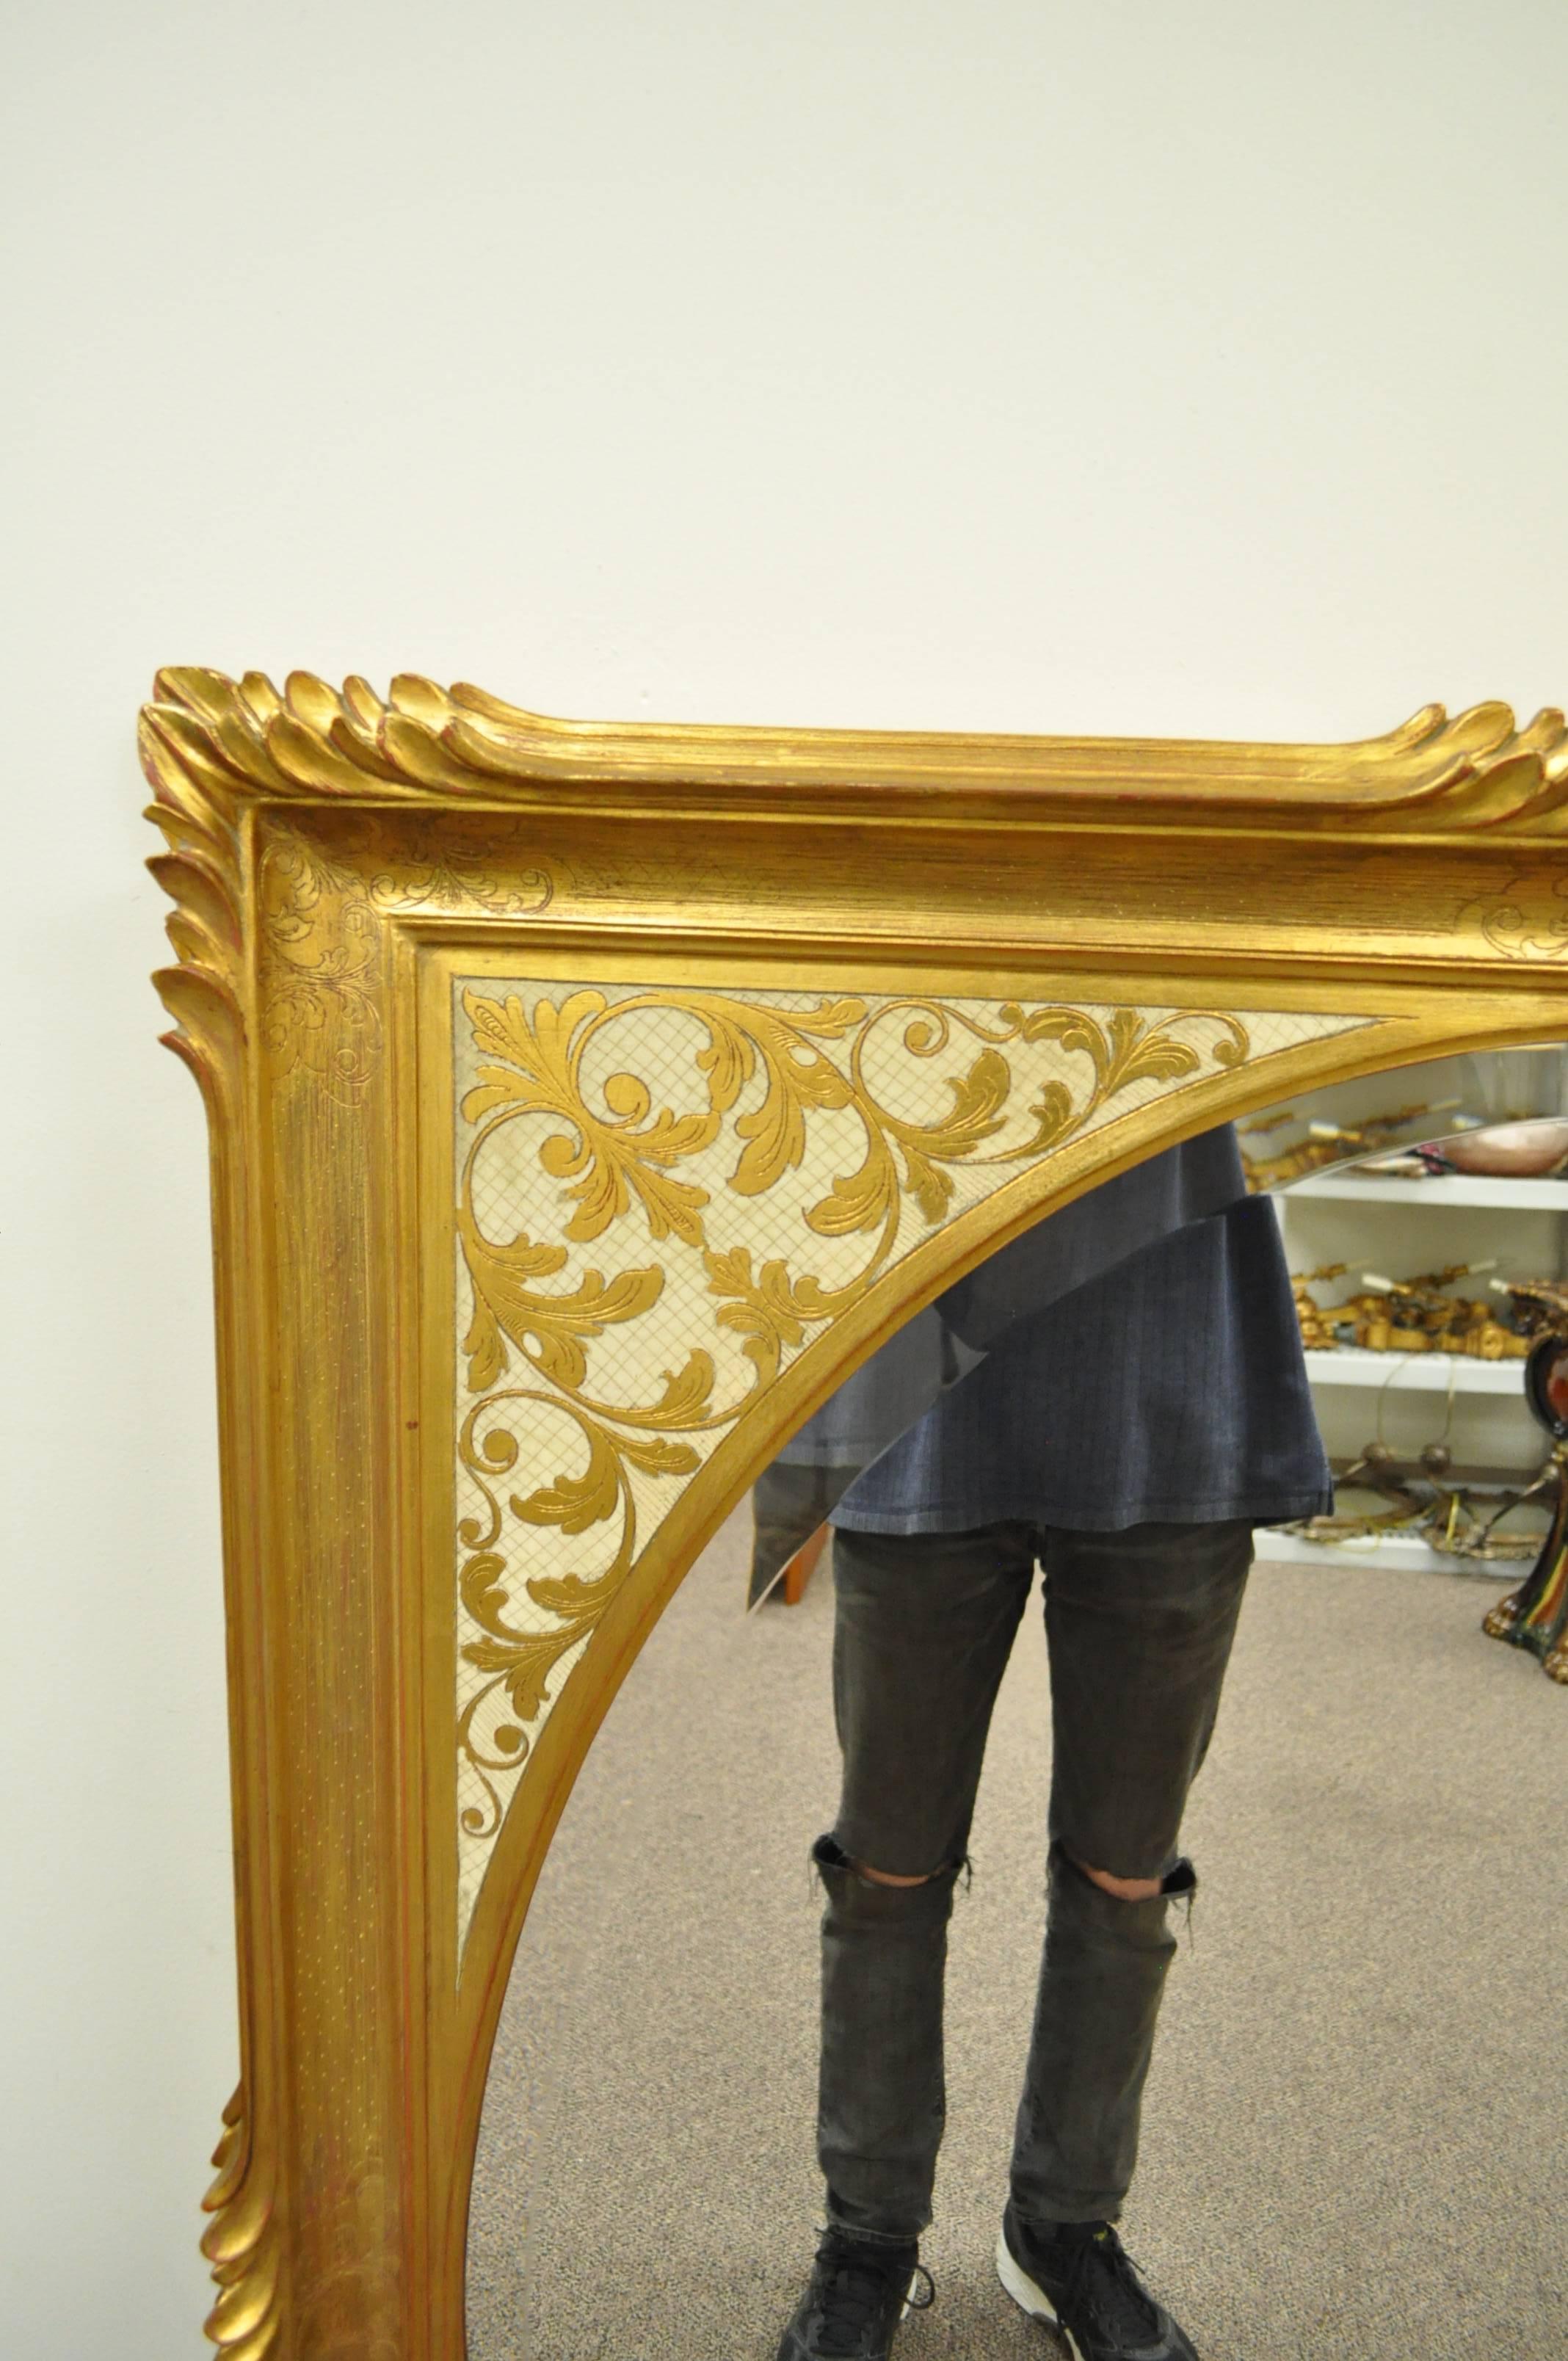 Beautiful 1960s Italian florentine carved wood wall mirror. Item features a cream and gold gilt finish, carved acanthus frame, oval beveled glass central mirror, and great overall form. Hardware can be added to hang the mirror vertically or